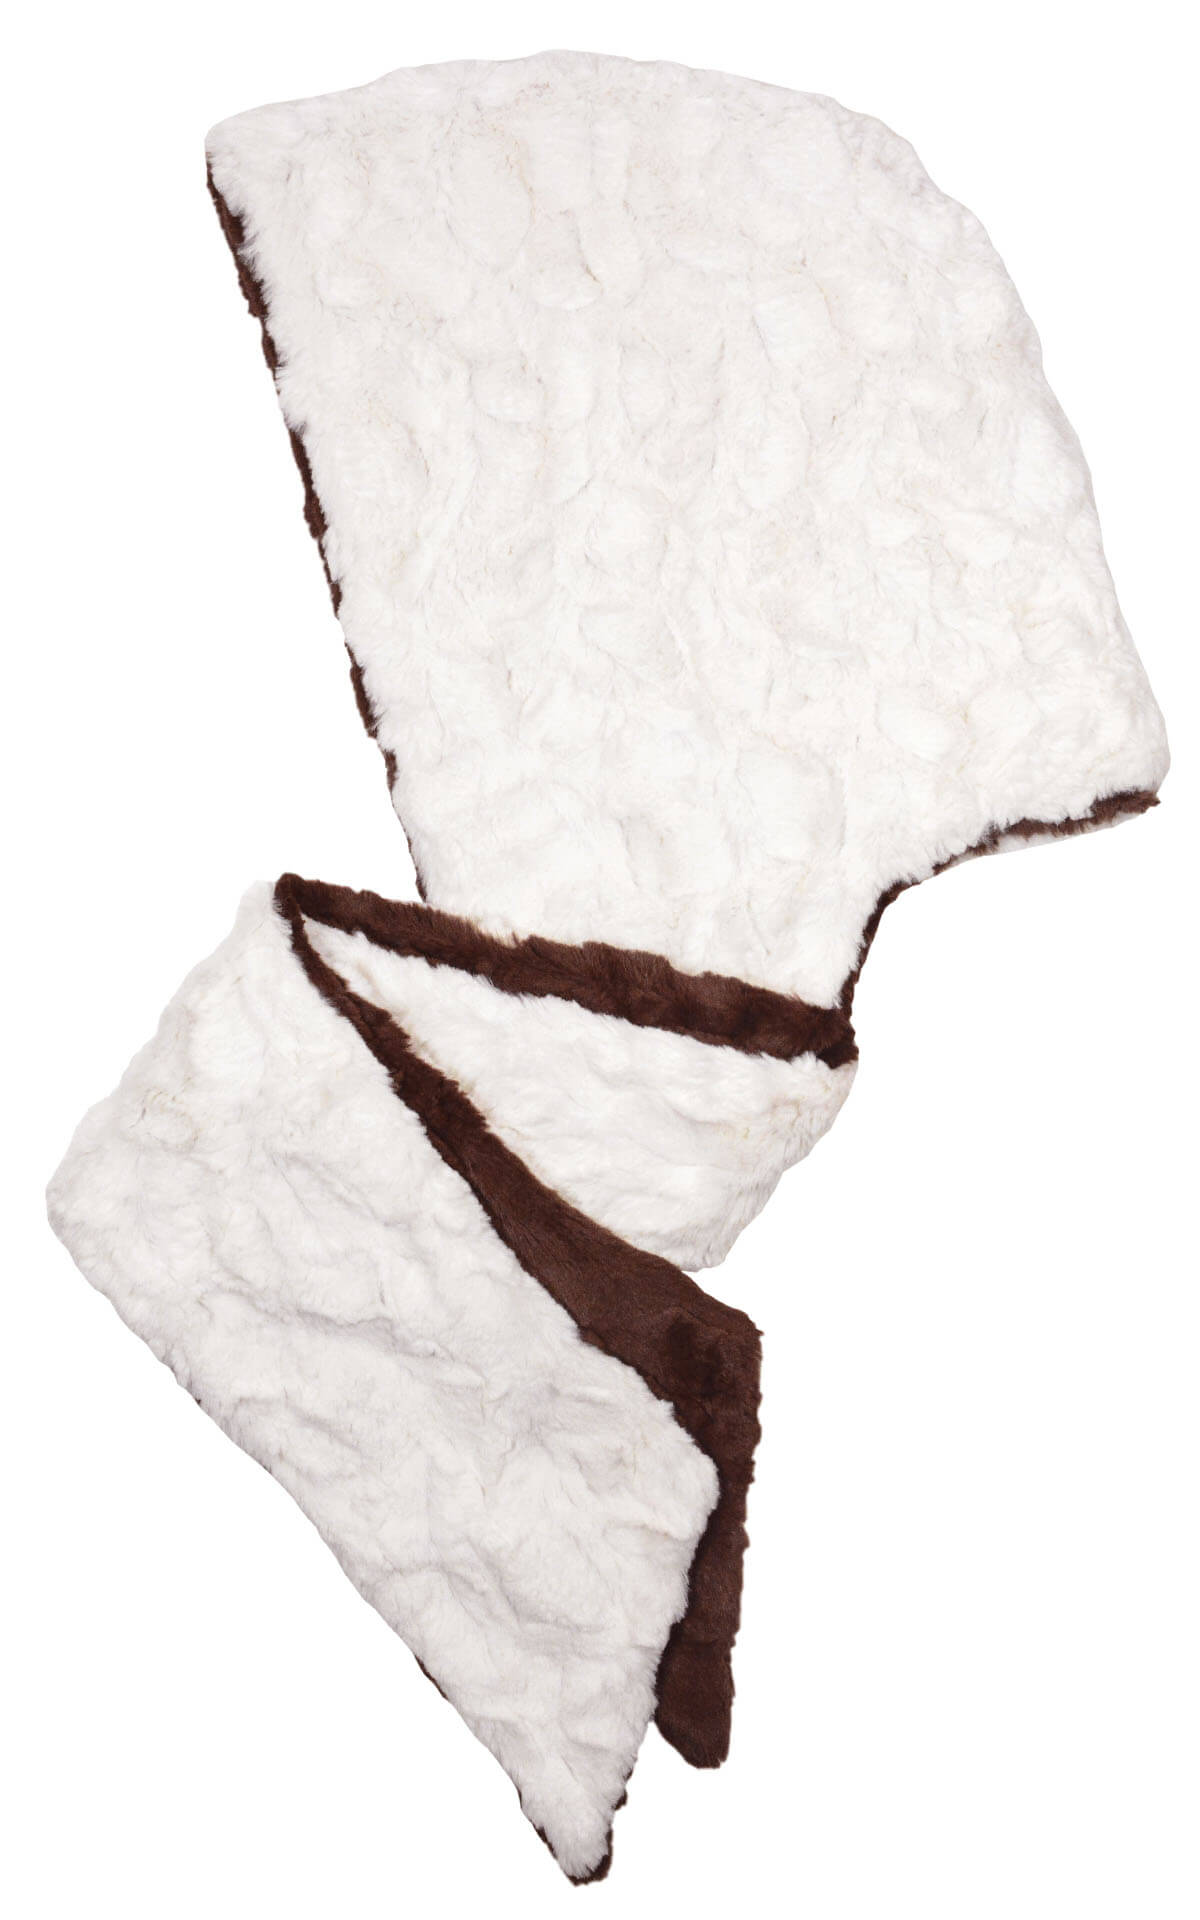 Hoody Scarf Cuddly Faux Fur in Ivory with Chocolate - made in Seattle, WA